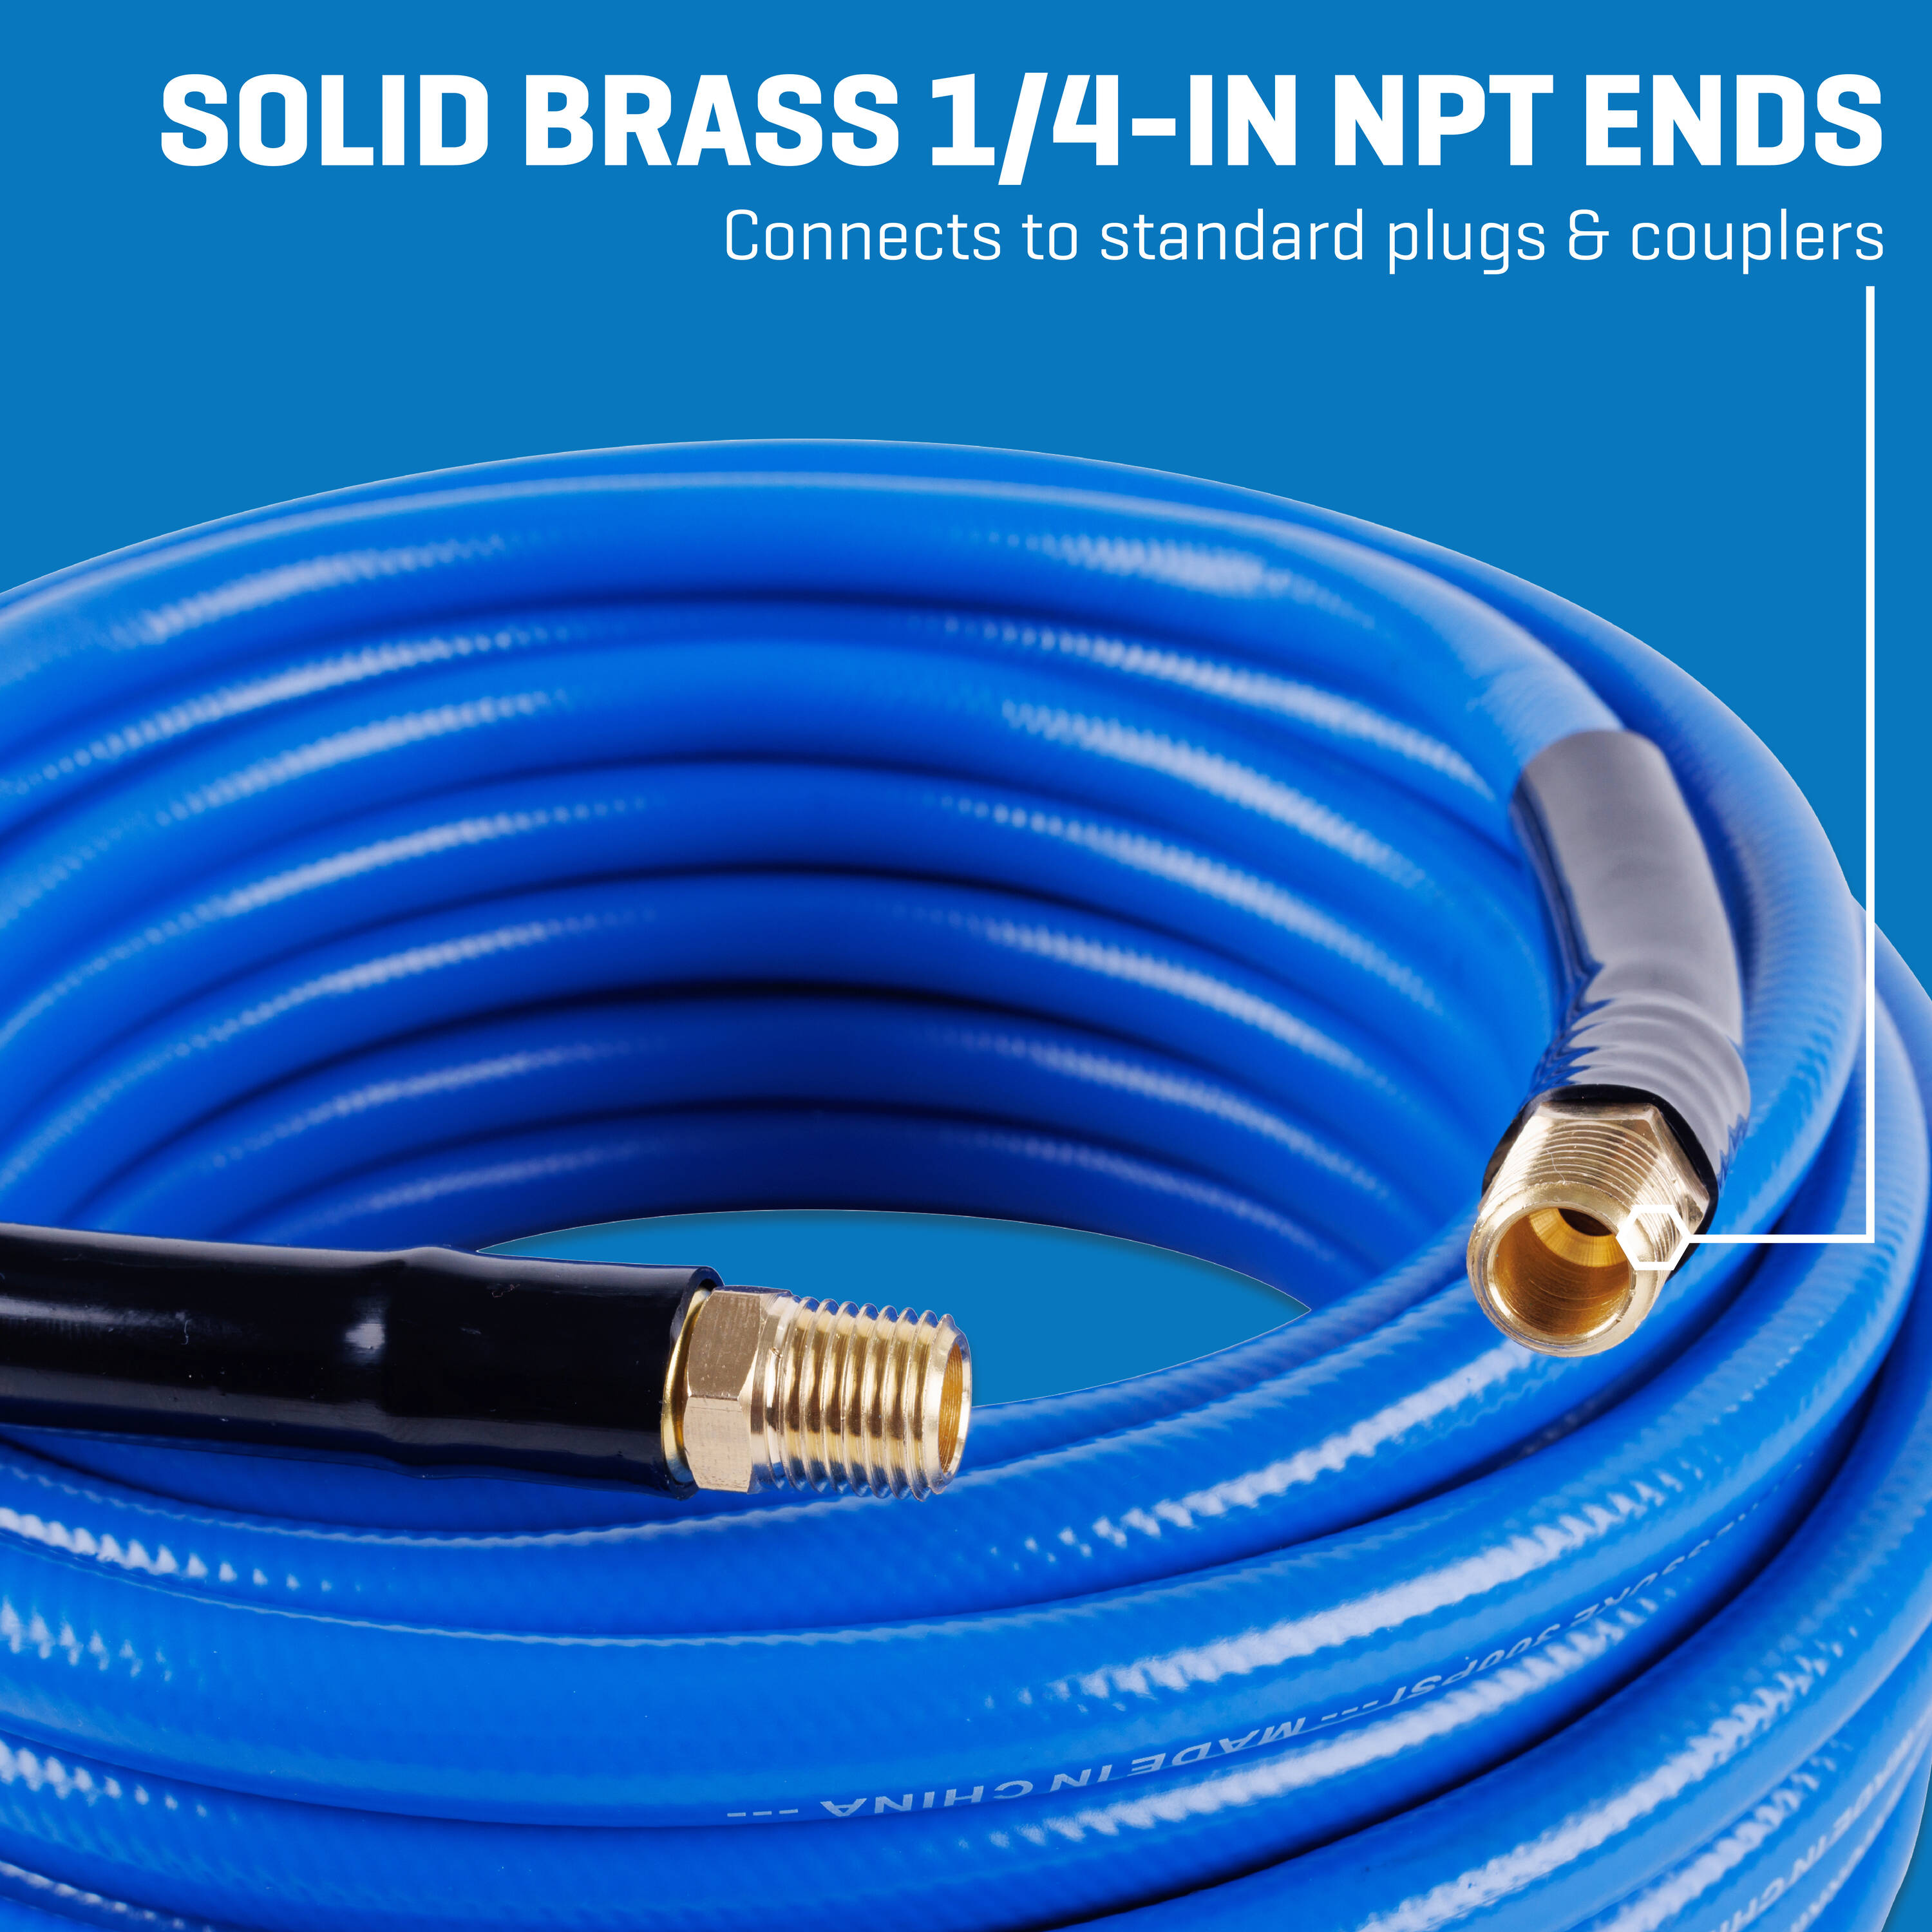 Kobalt 3/8-in X 50-ft Poly Hybrid Air Hose in the Air Compressor Hoses  department at